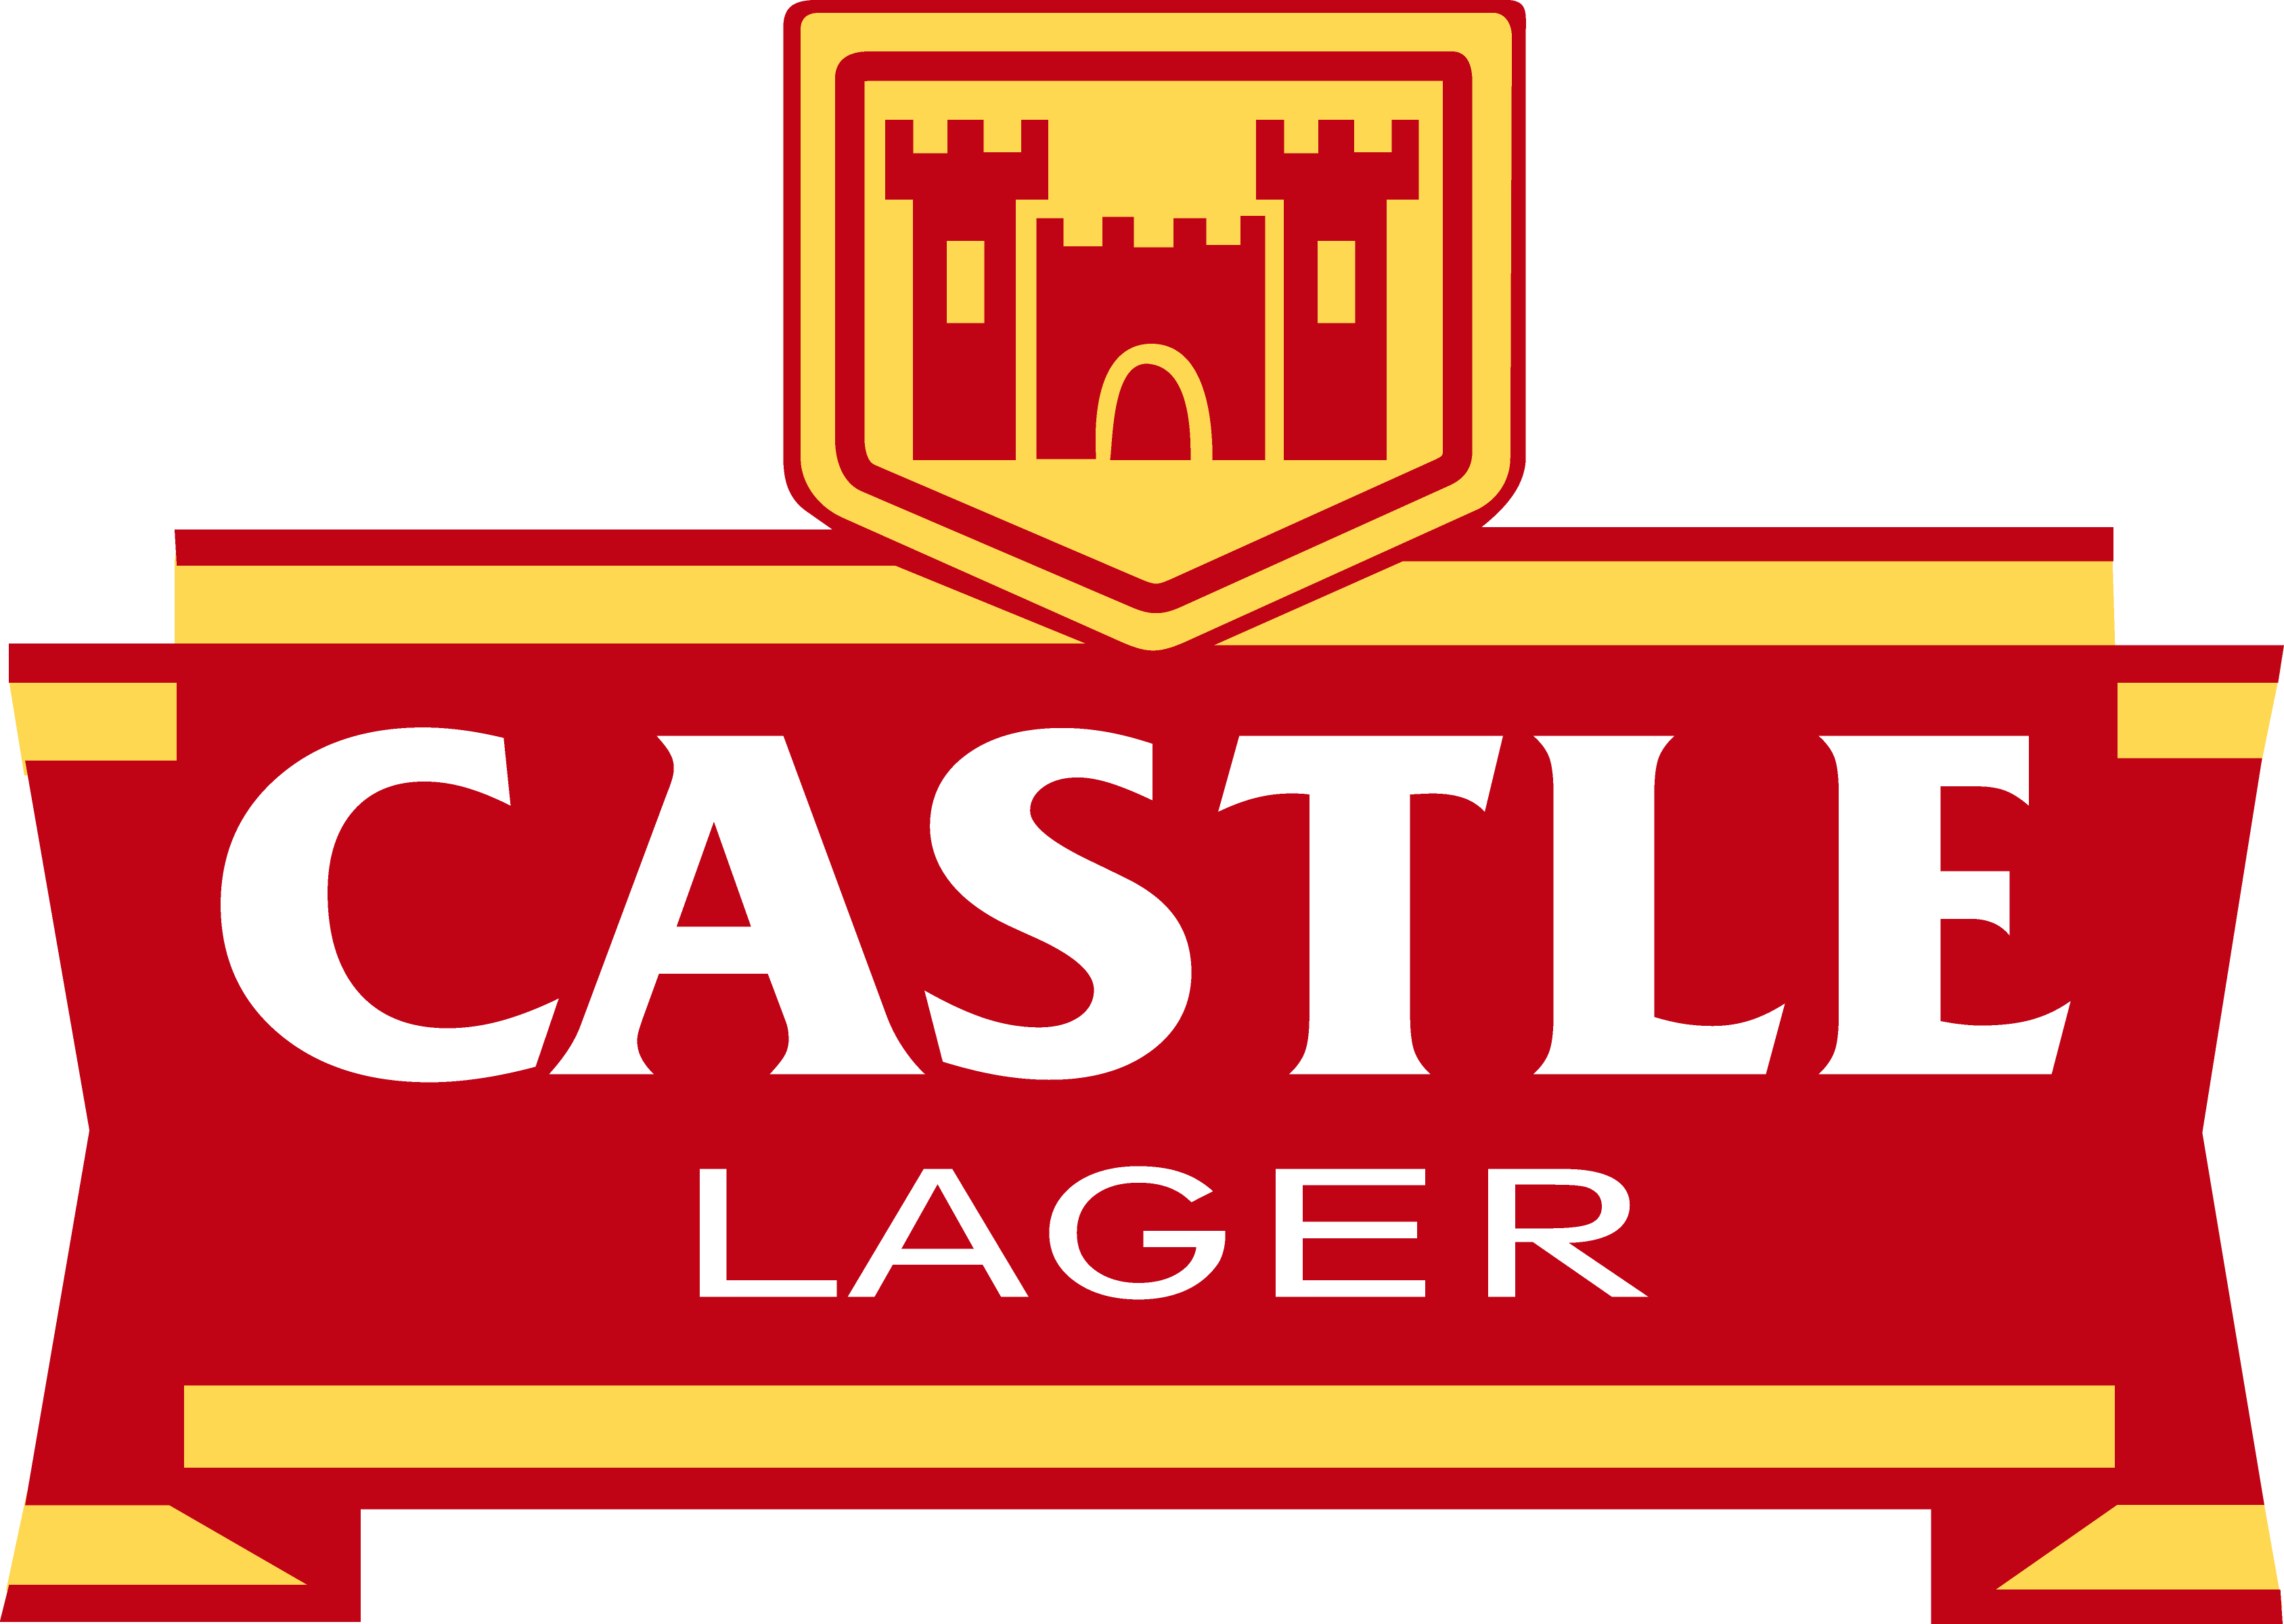 Castle Beer Logo - Castle Lager. My favourite!. Places and Memories. Castle, Logos, Beer